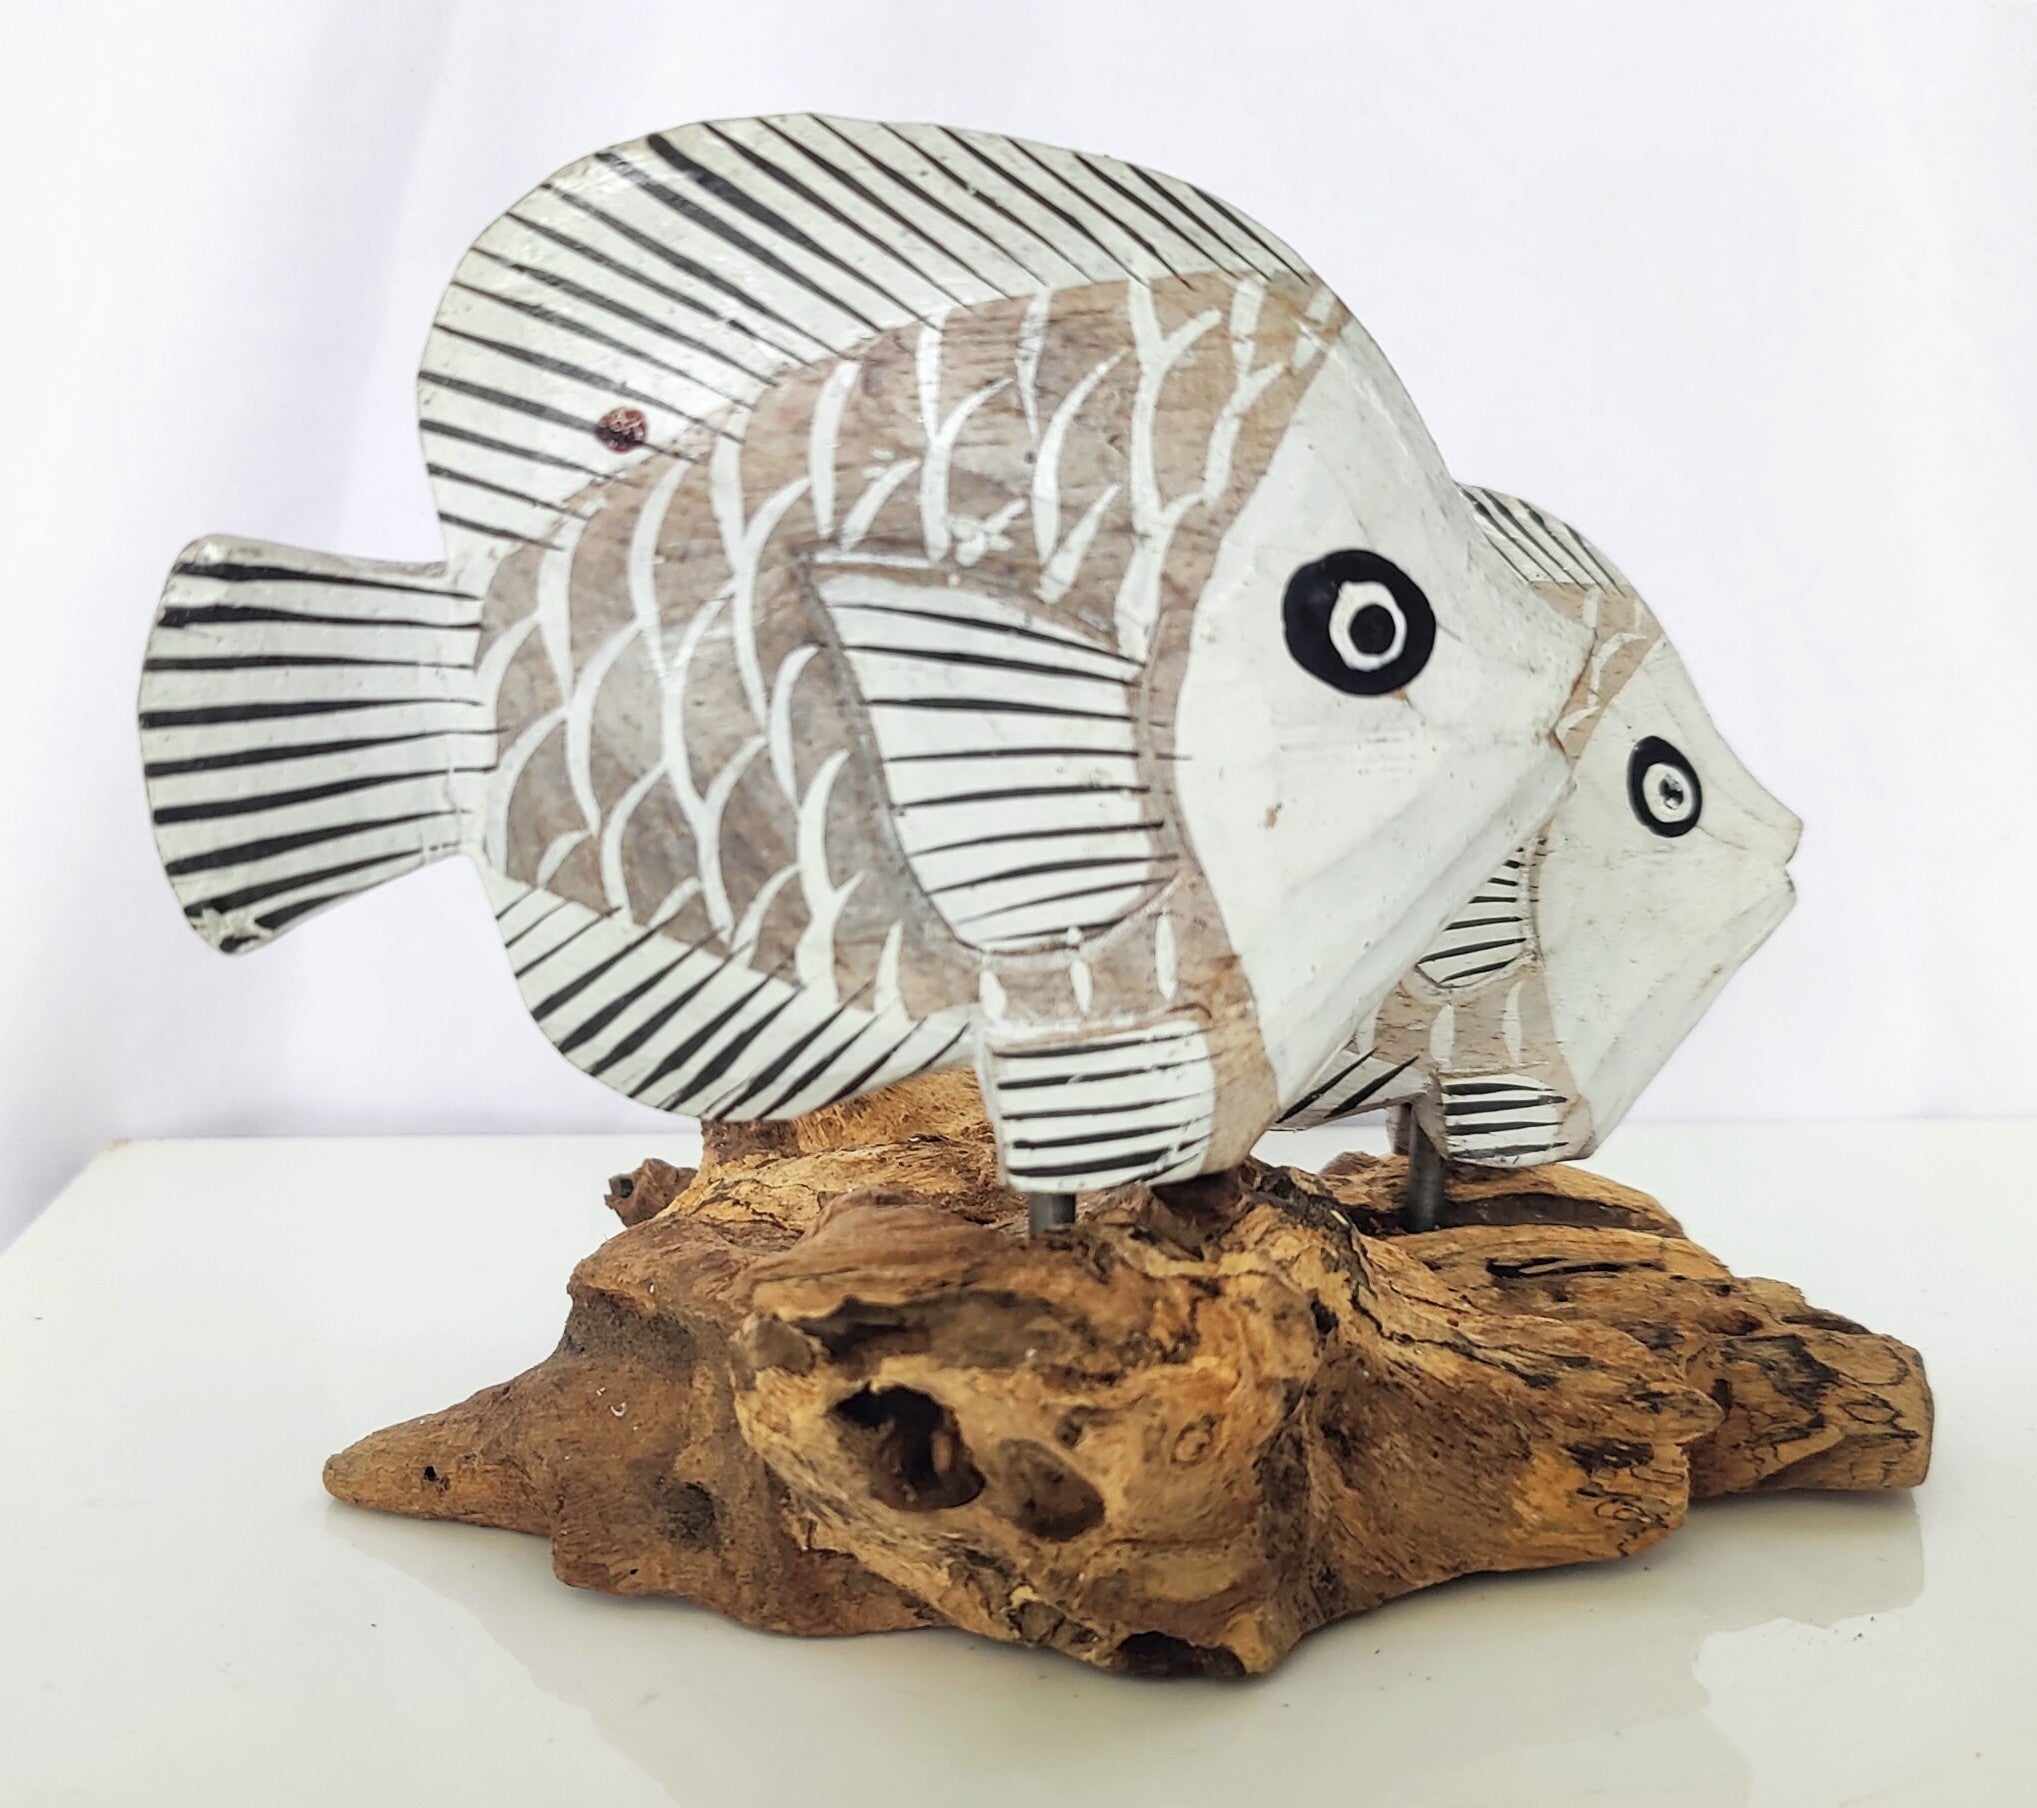 Hand-Carved Wood Fish